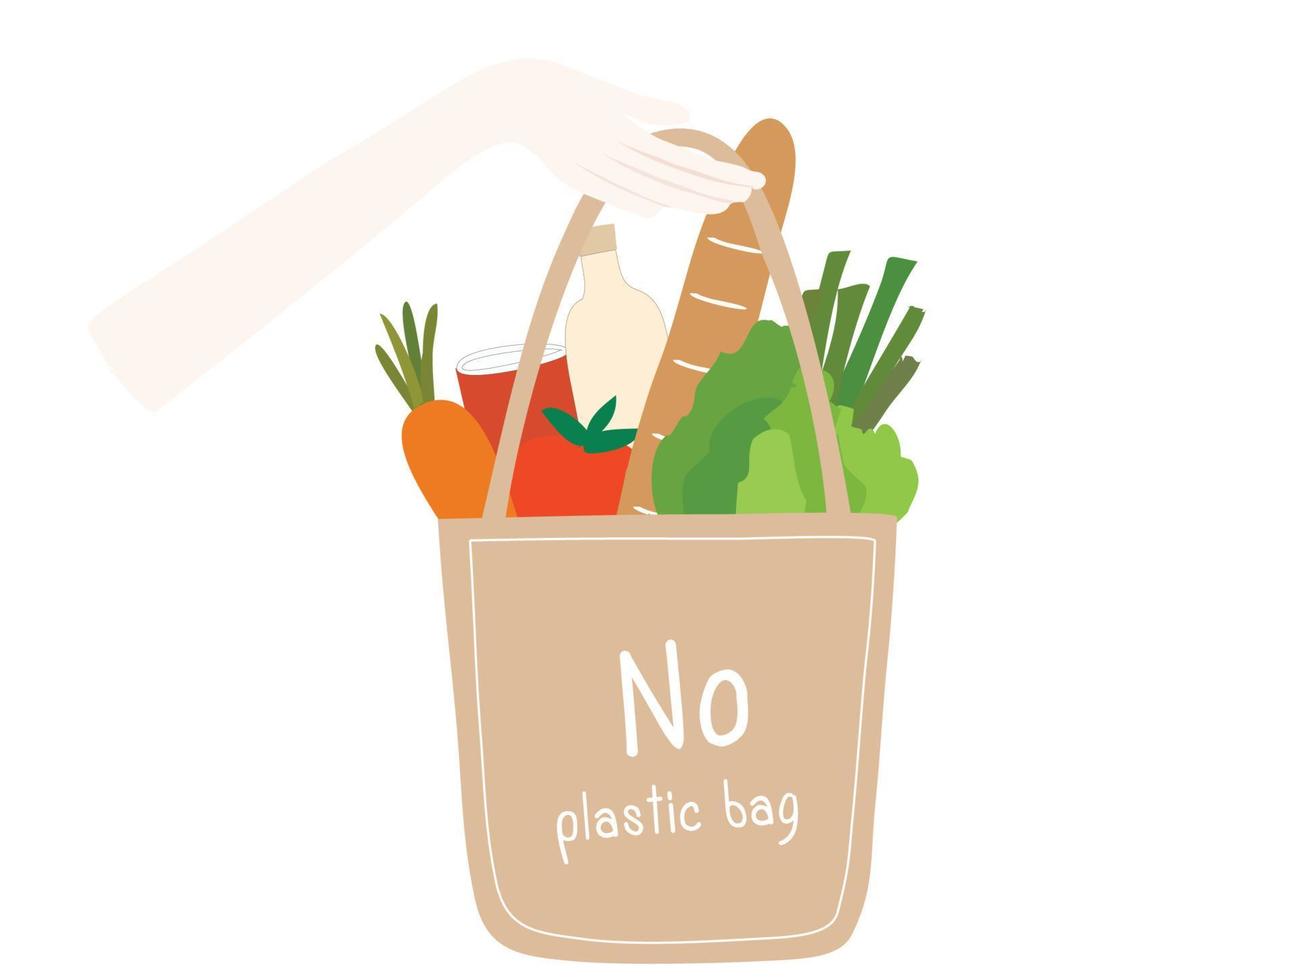 Say no to plastic bag lettering on shopping clothing bag isolated vector illustration.